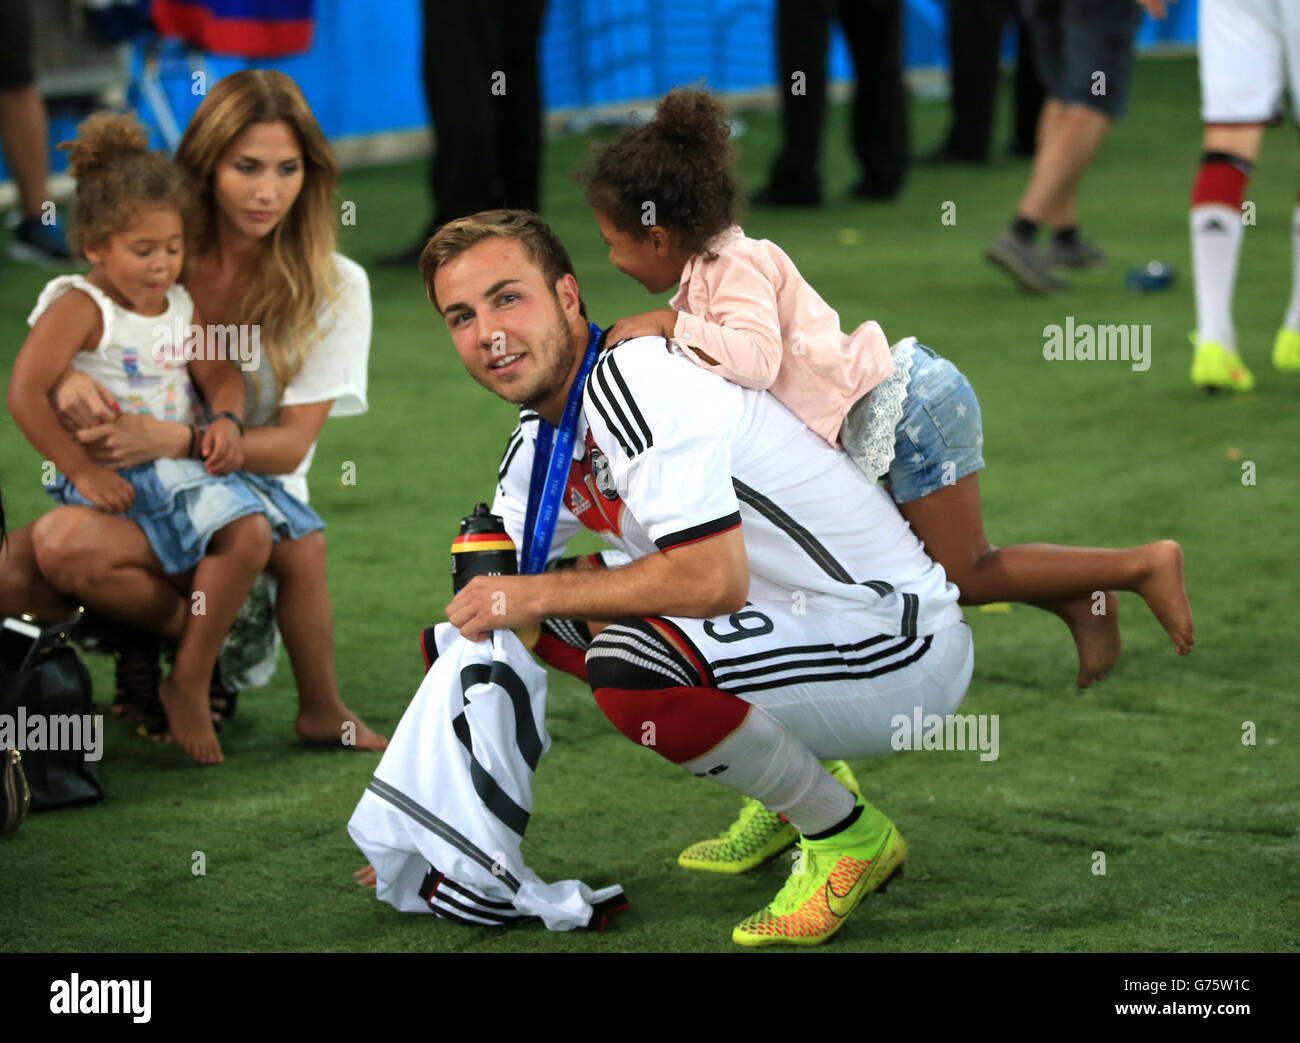 Soccer - FIFA World Cup 2014 - Final - Germany v Argentina - Estadio do Maracana. Germany's Mario Gotze celebrates on the pitch after lifting the FIFA World Cup 2014 Trophy Stock Photo